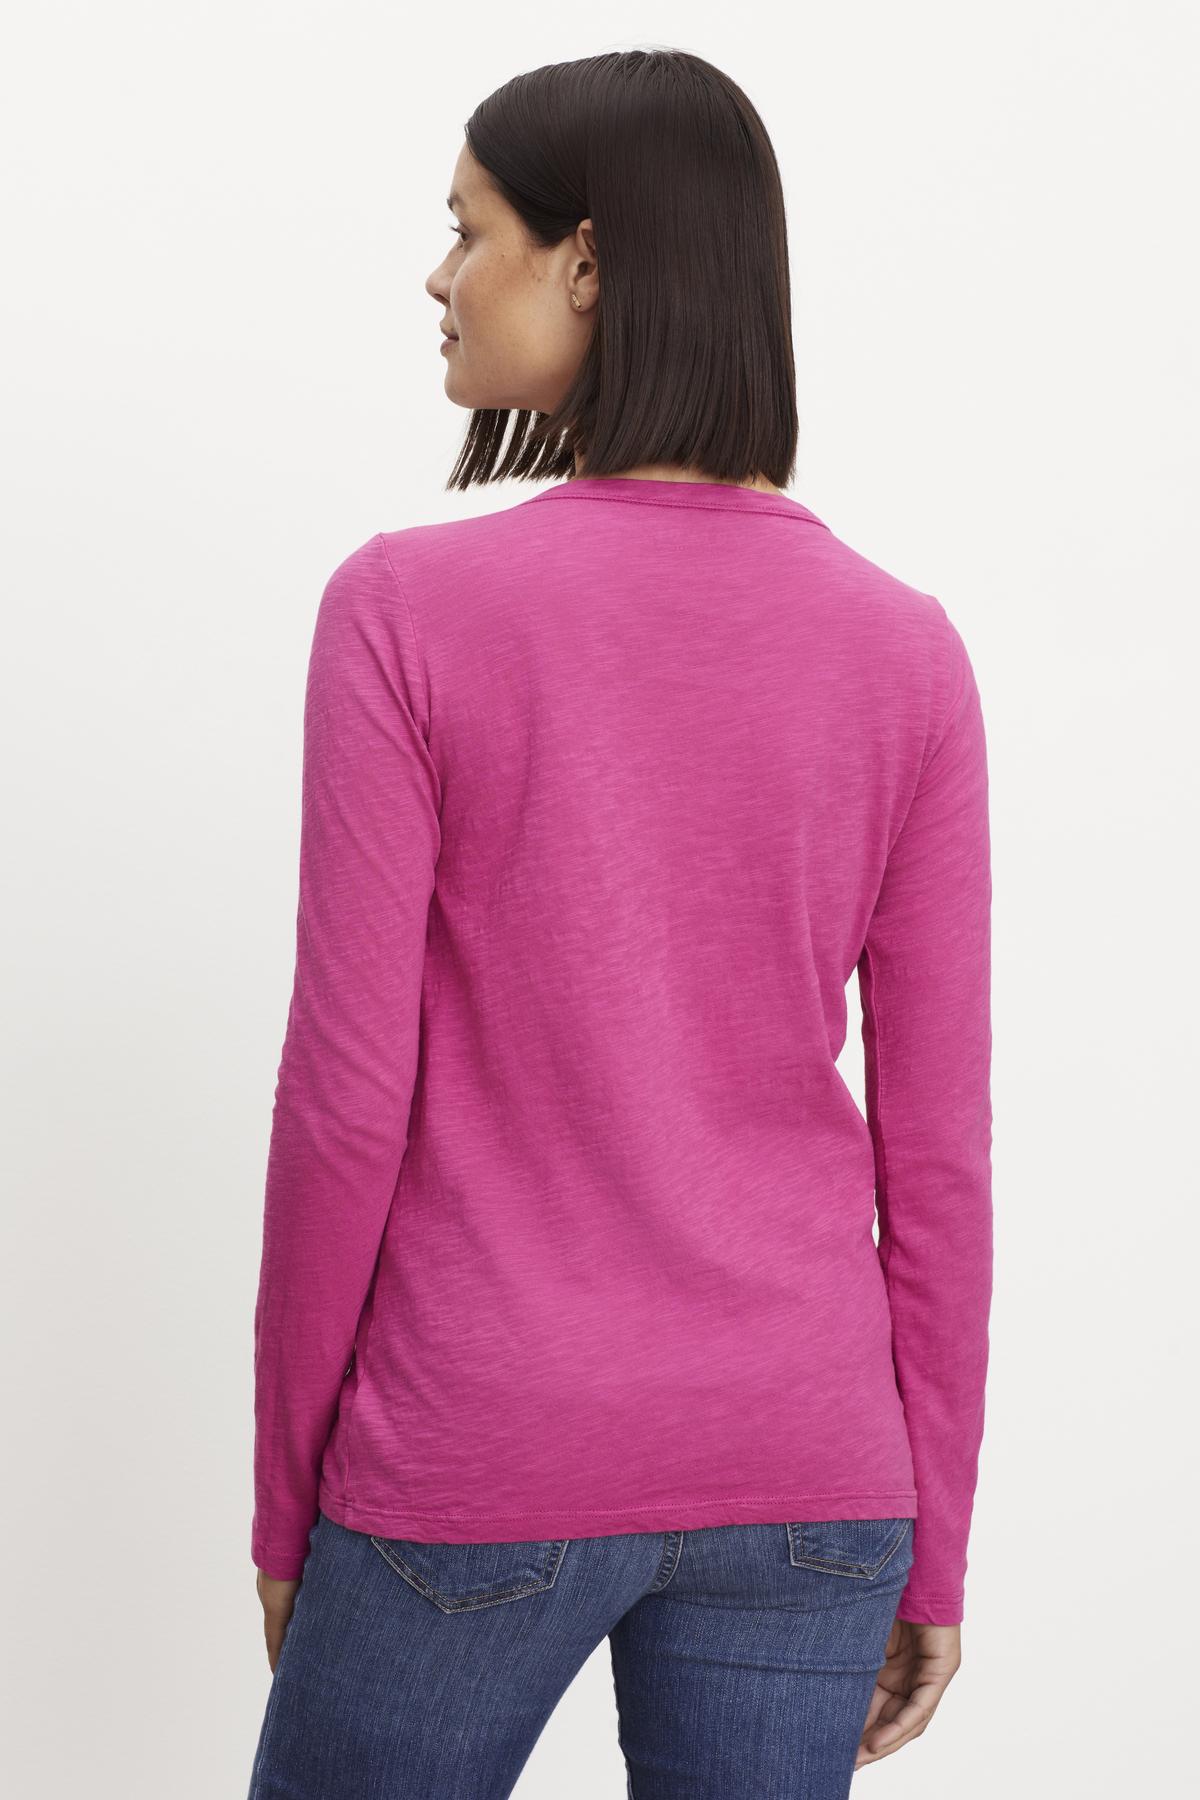 The back view of a woman wearing a Velvet by Graham & Spencer LIZZIE ORIGINAL SLUB LONG SLEEVE TEE.-35701947629761